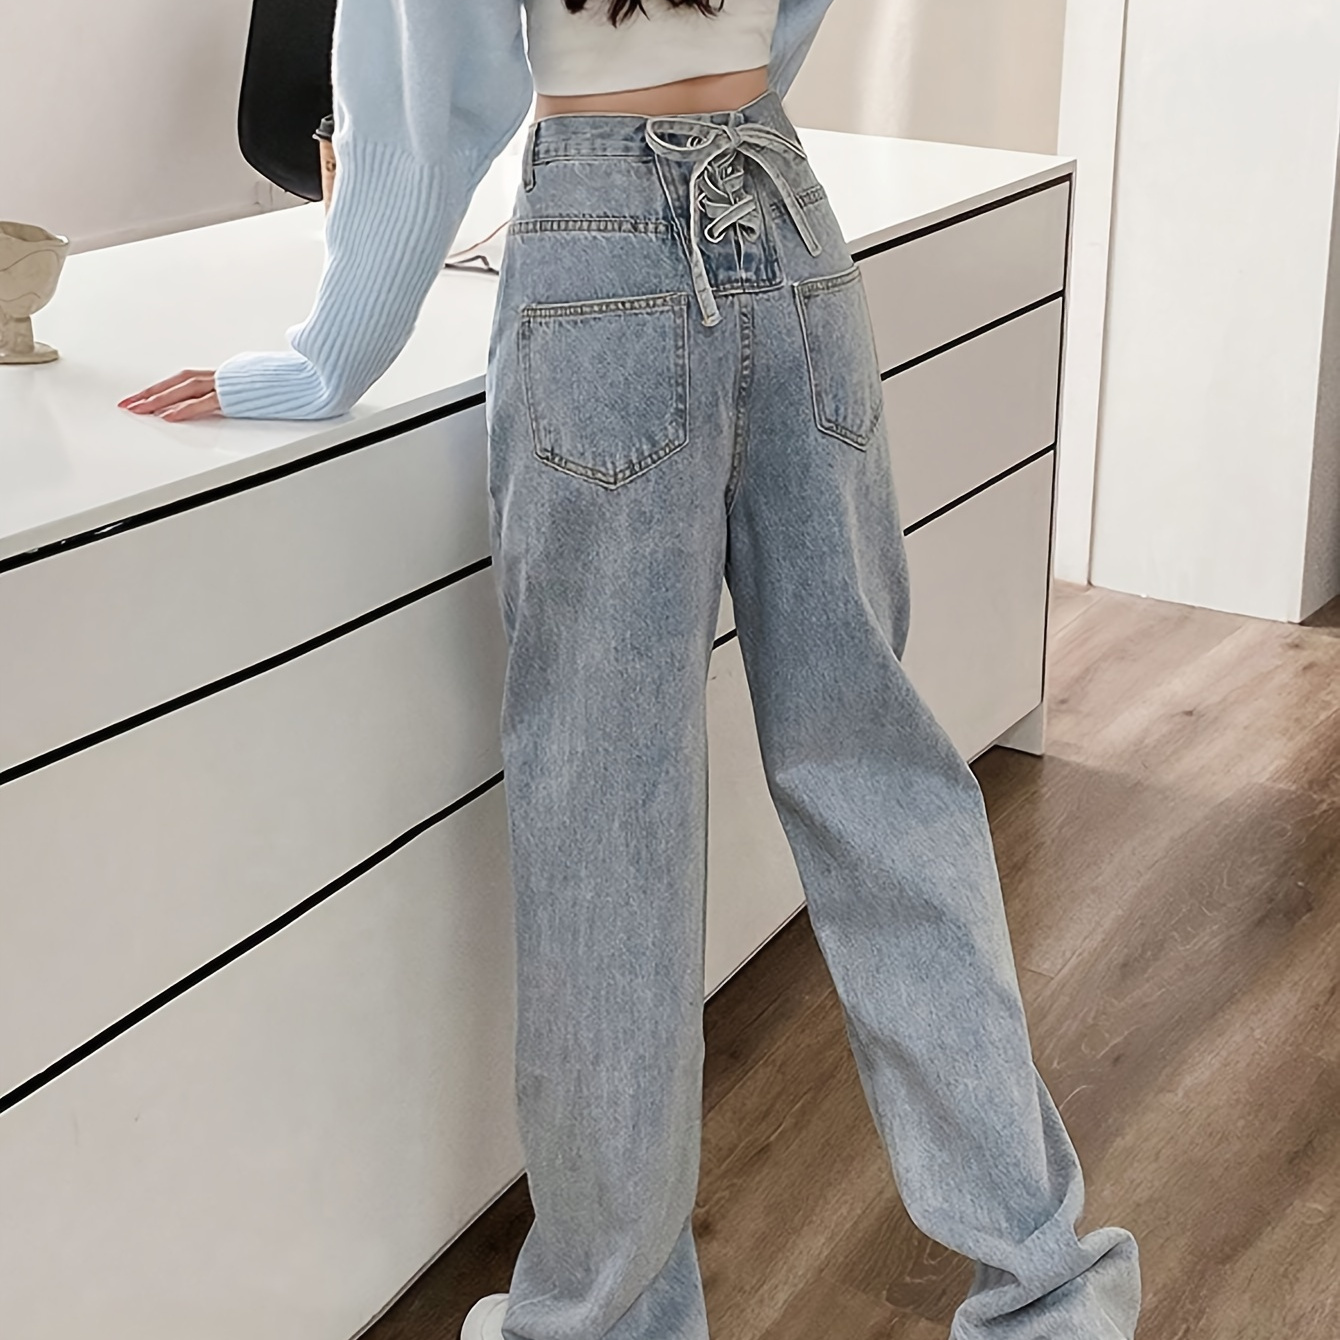 

High-waisted Wide-leg Jeans For Women, Solid Color With Tie Back Design, Casual Street Style, Washed Denim, Loose Fit, Versatile Long Trousers